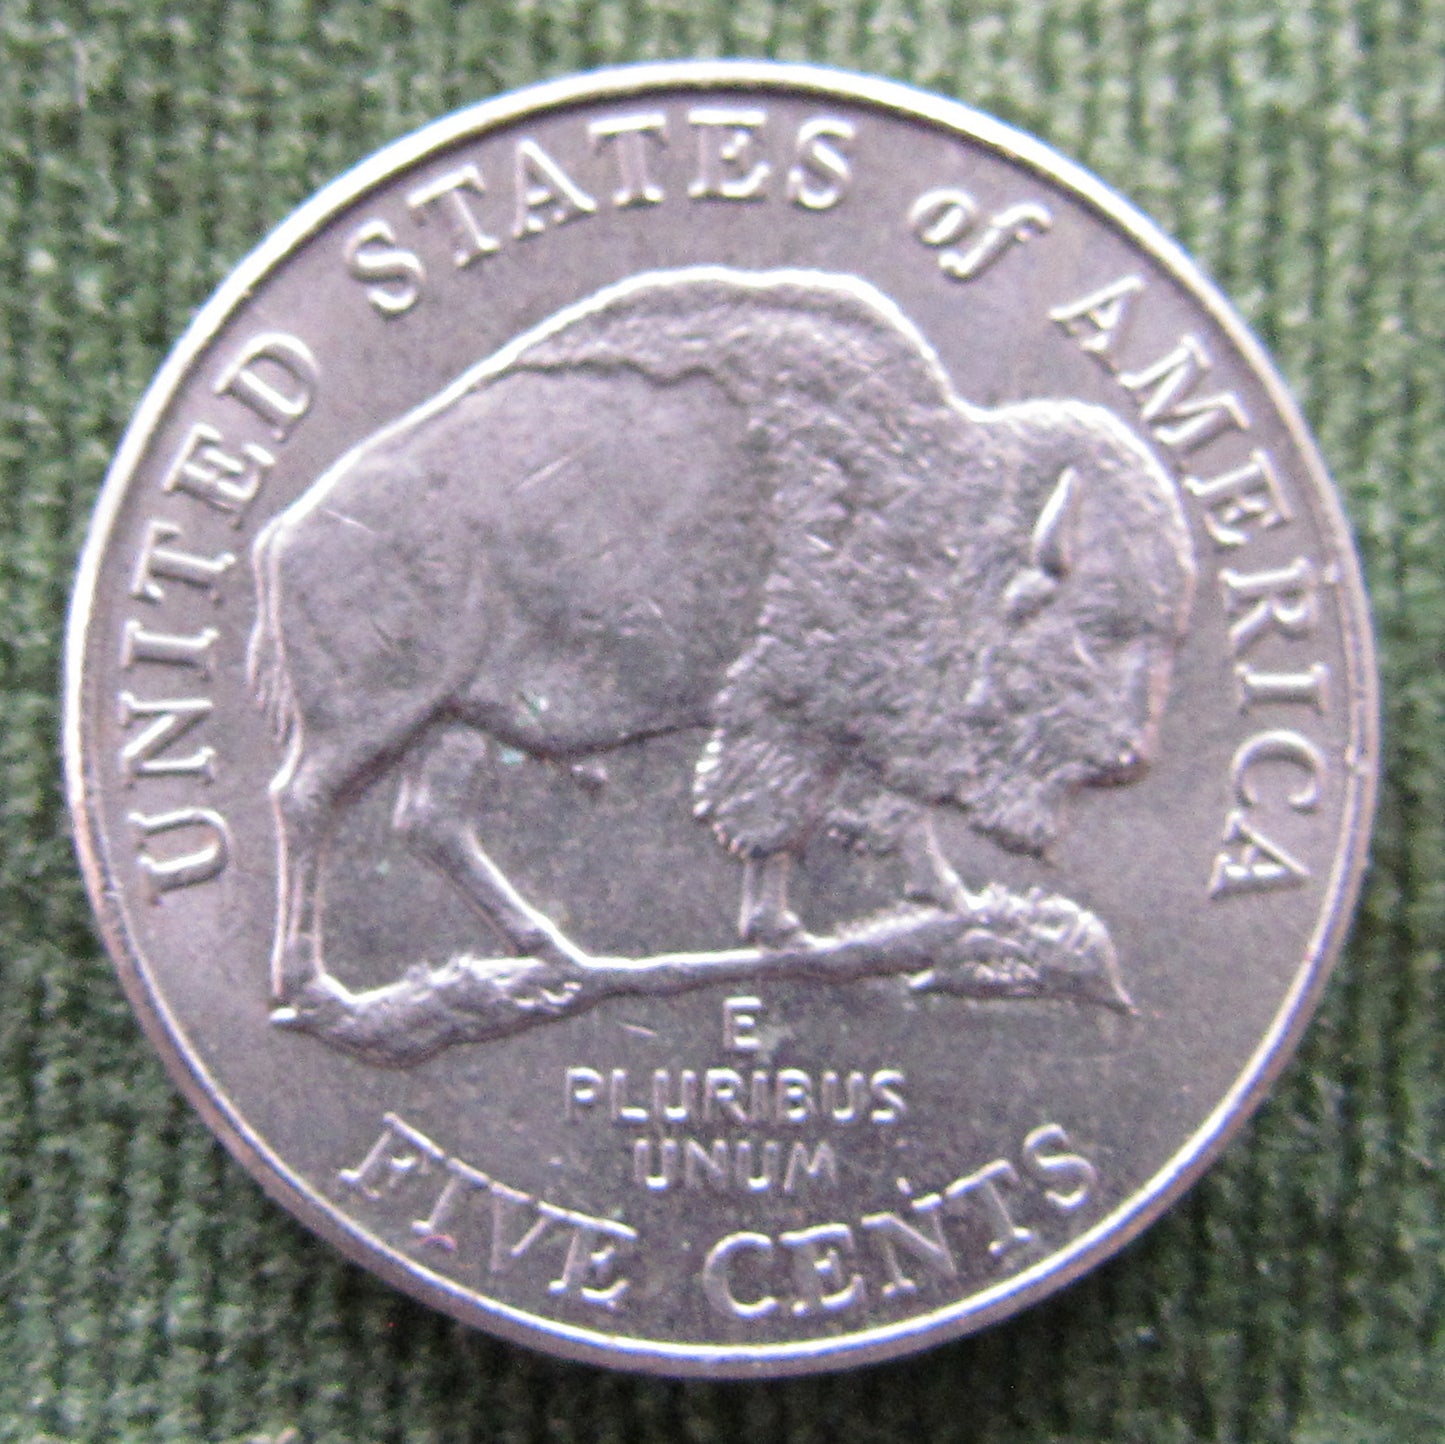 USA American 2005 D Nickel Jefferson Coin - Circulated